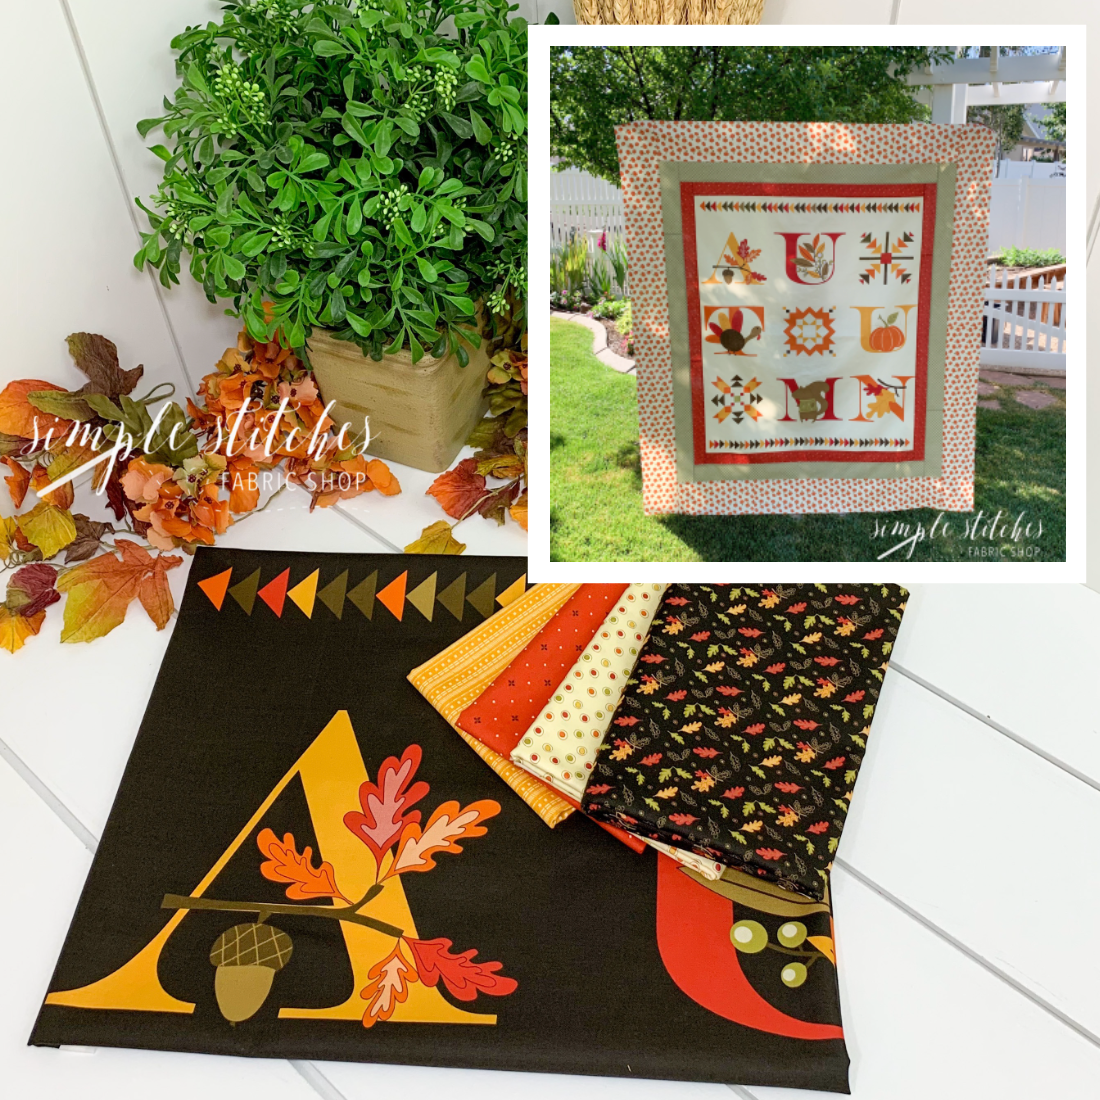 Awesome Autumn Quilt Kit - Dark Panel – Simple Stitches Fabric Shop, LLC